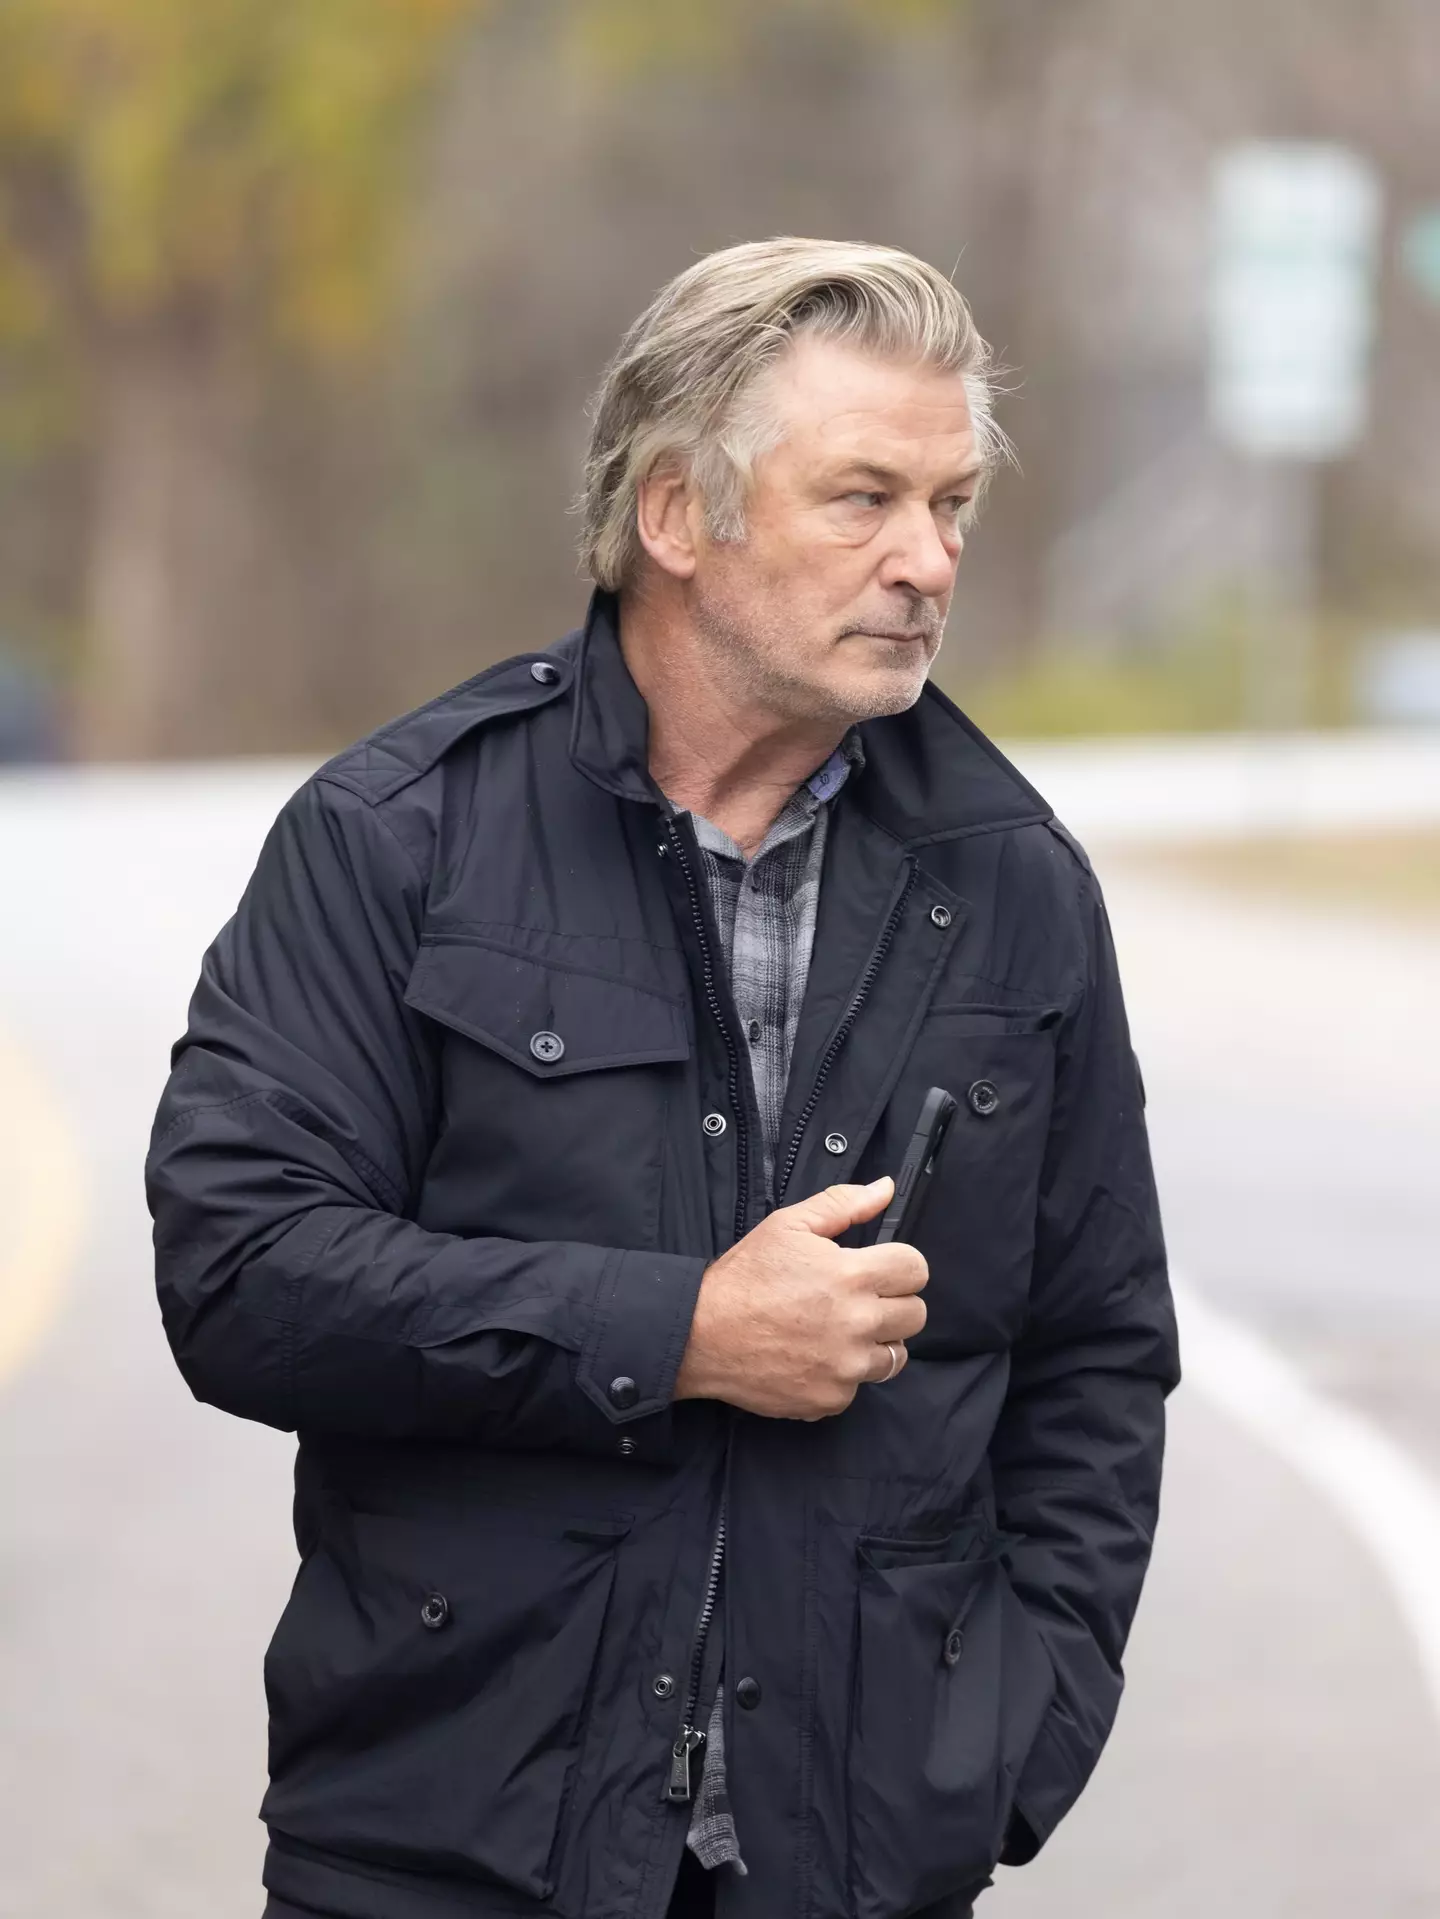 Alec Baldwin has been indicted on the same charge.